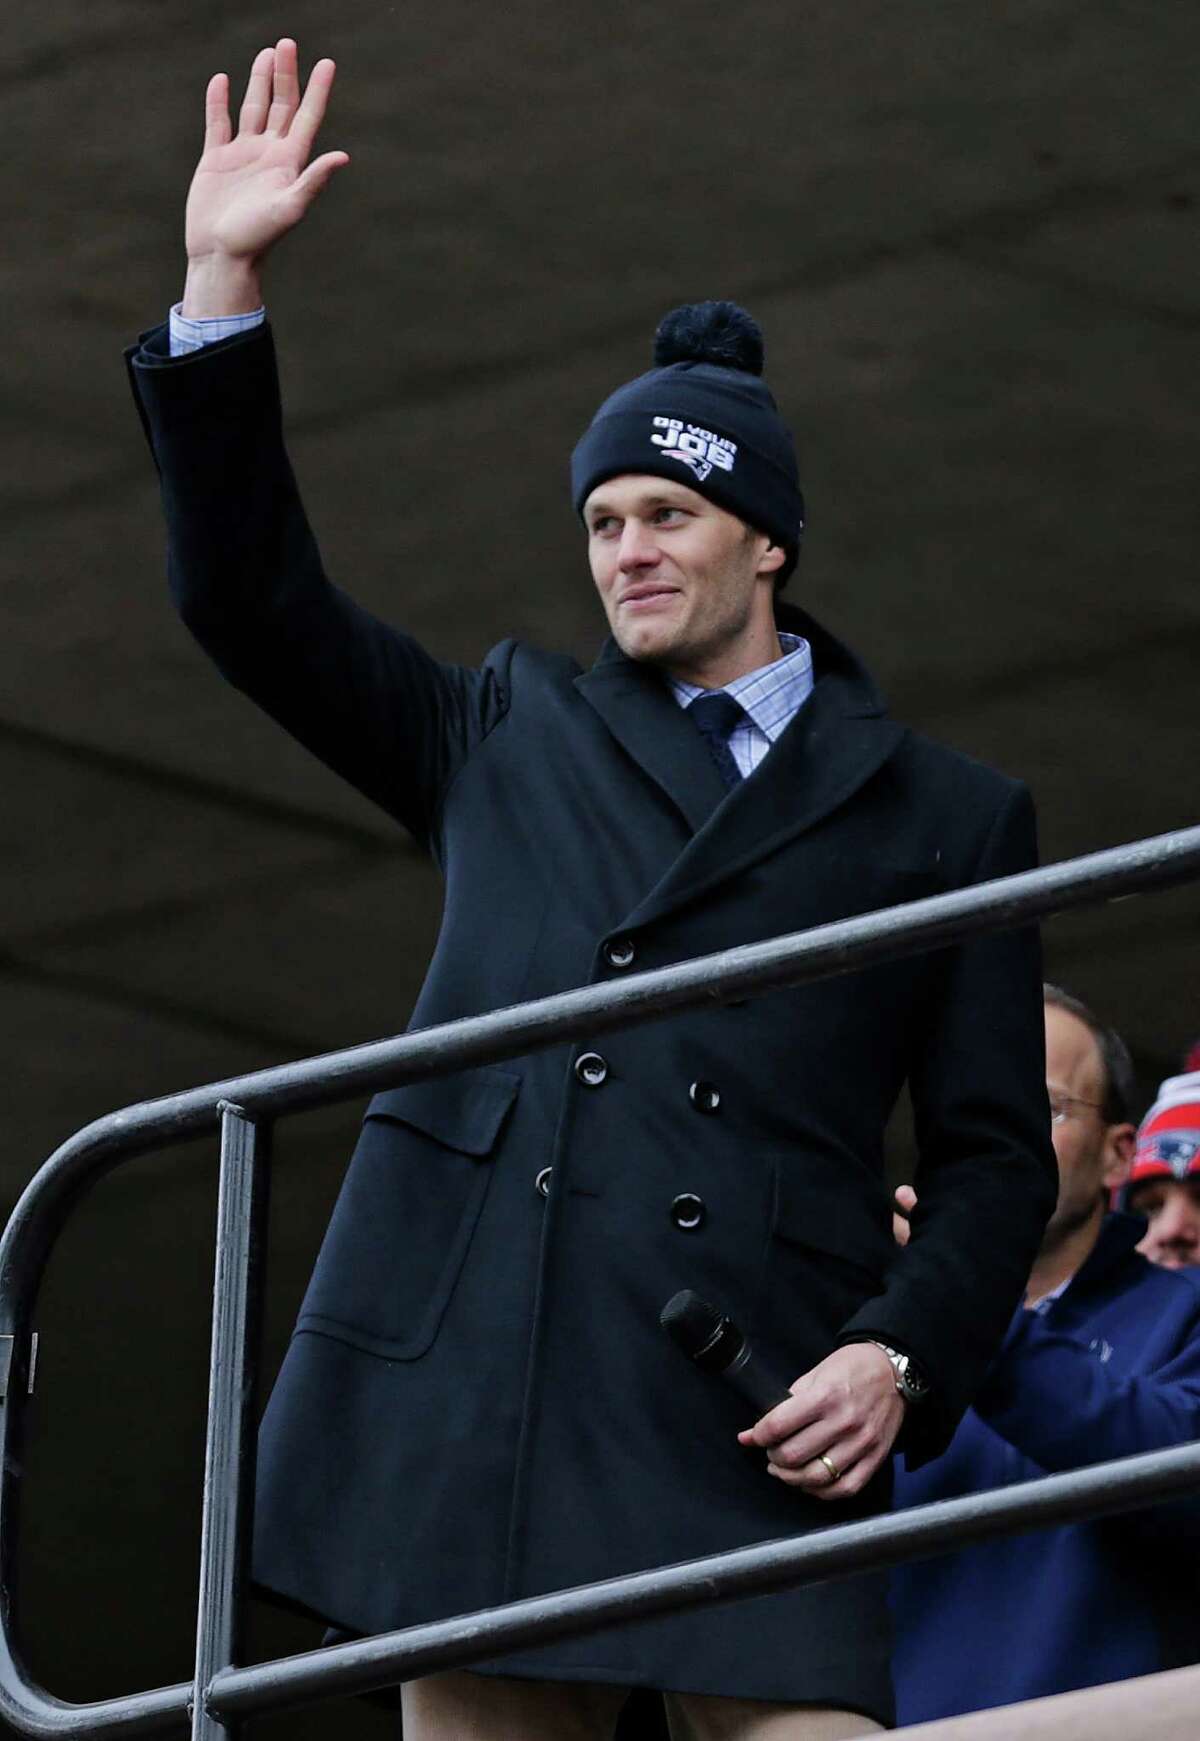 New England Patriots quarterback Tom Brady waves to a crowd of supports during an NFL football send-off rally at City Hall in Boston Monday, Jan. 26, 2015. The Patriots play the Seattle Seahawks in Sunday's Super Bowl XLIX in Glendale, Ariz. (AP Photo/Charles Krupa) ORG XMIT: MACK104